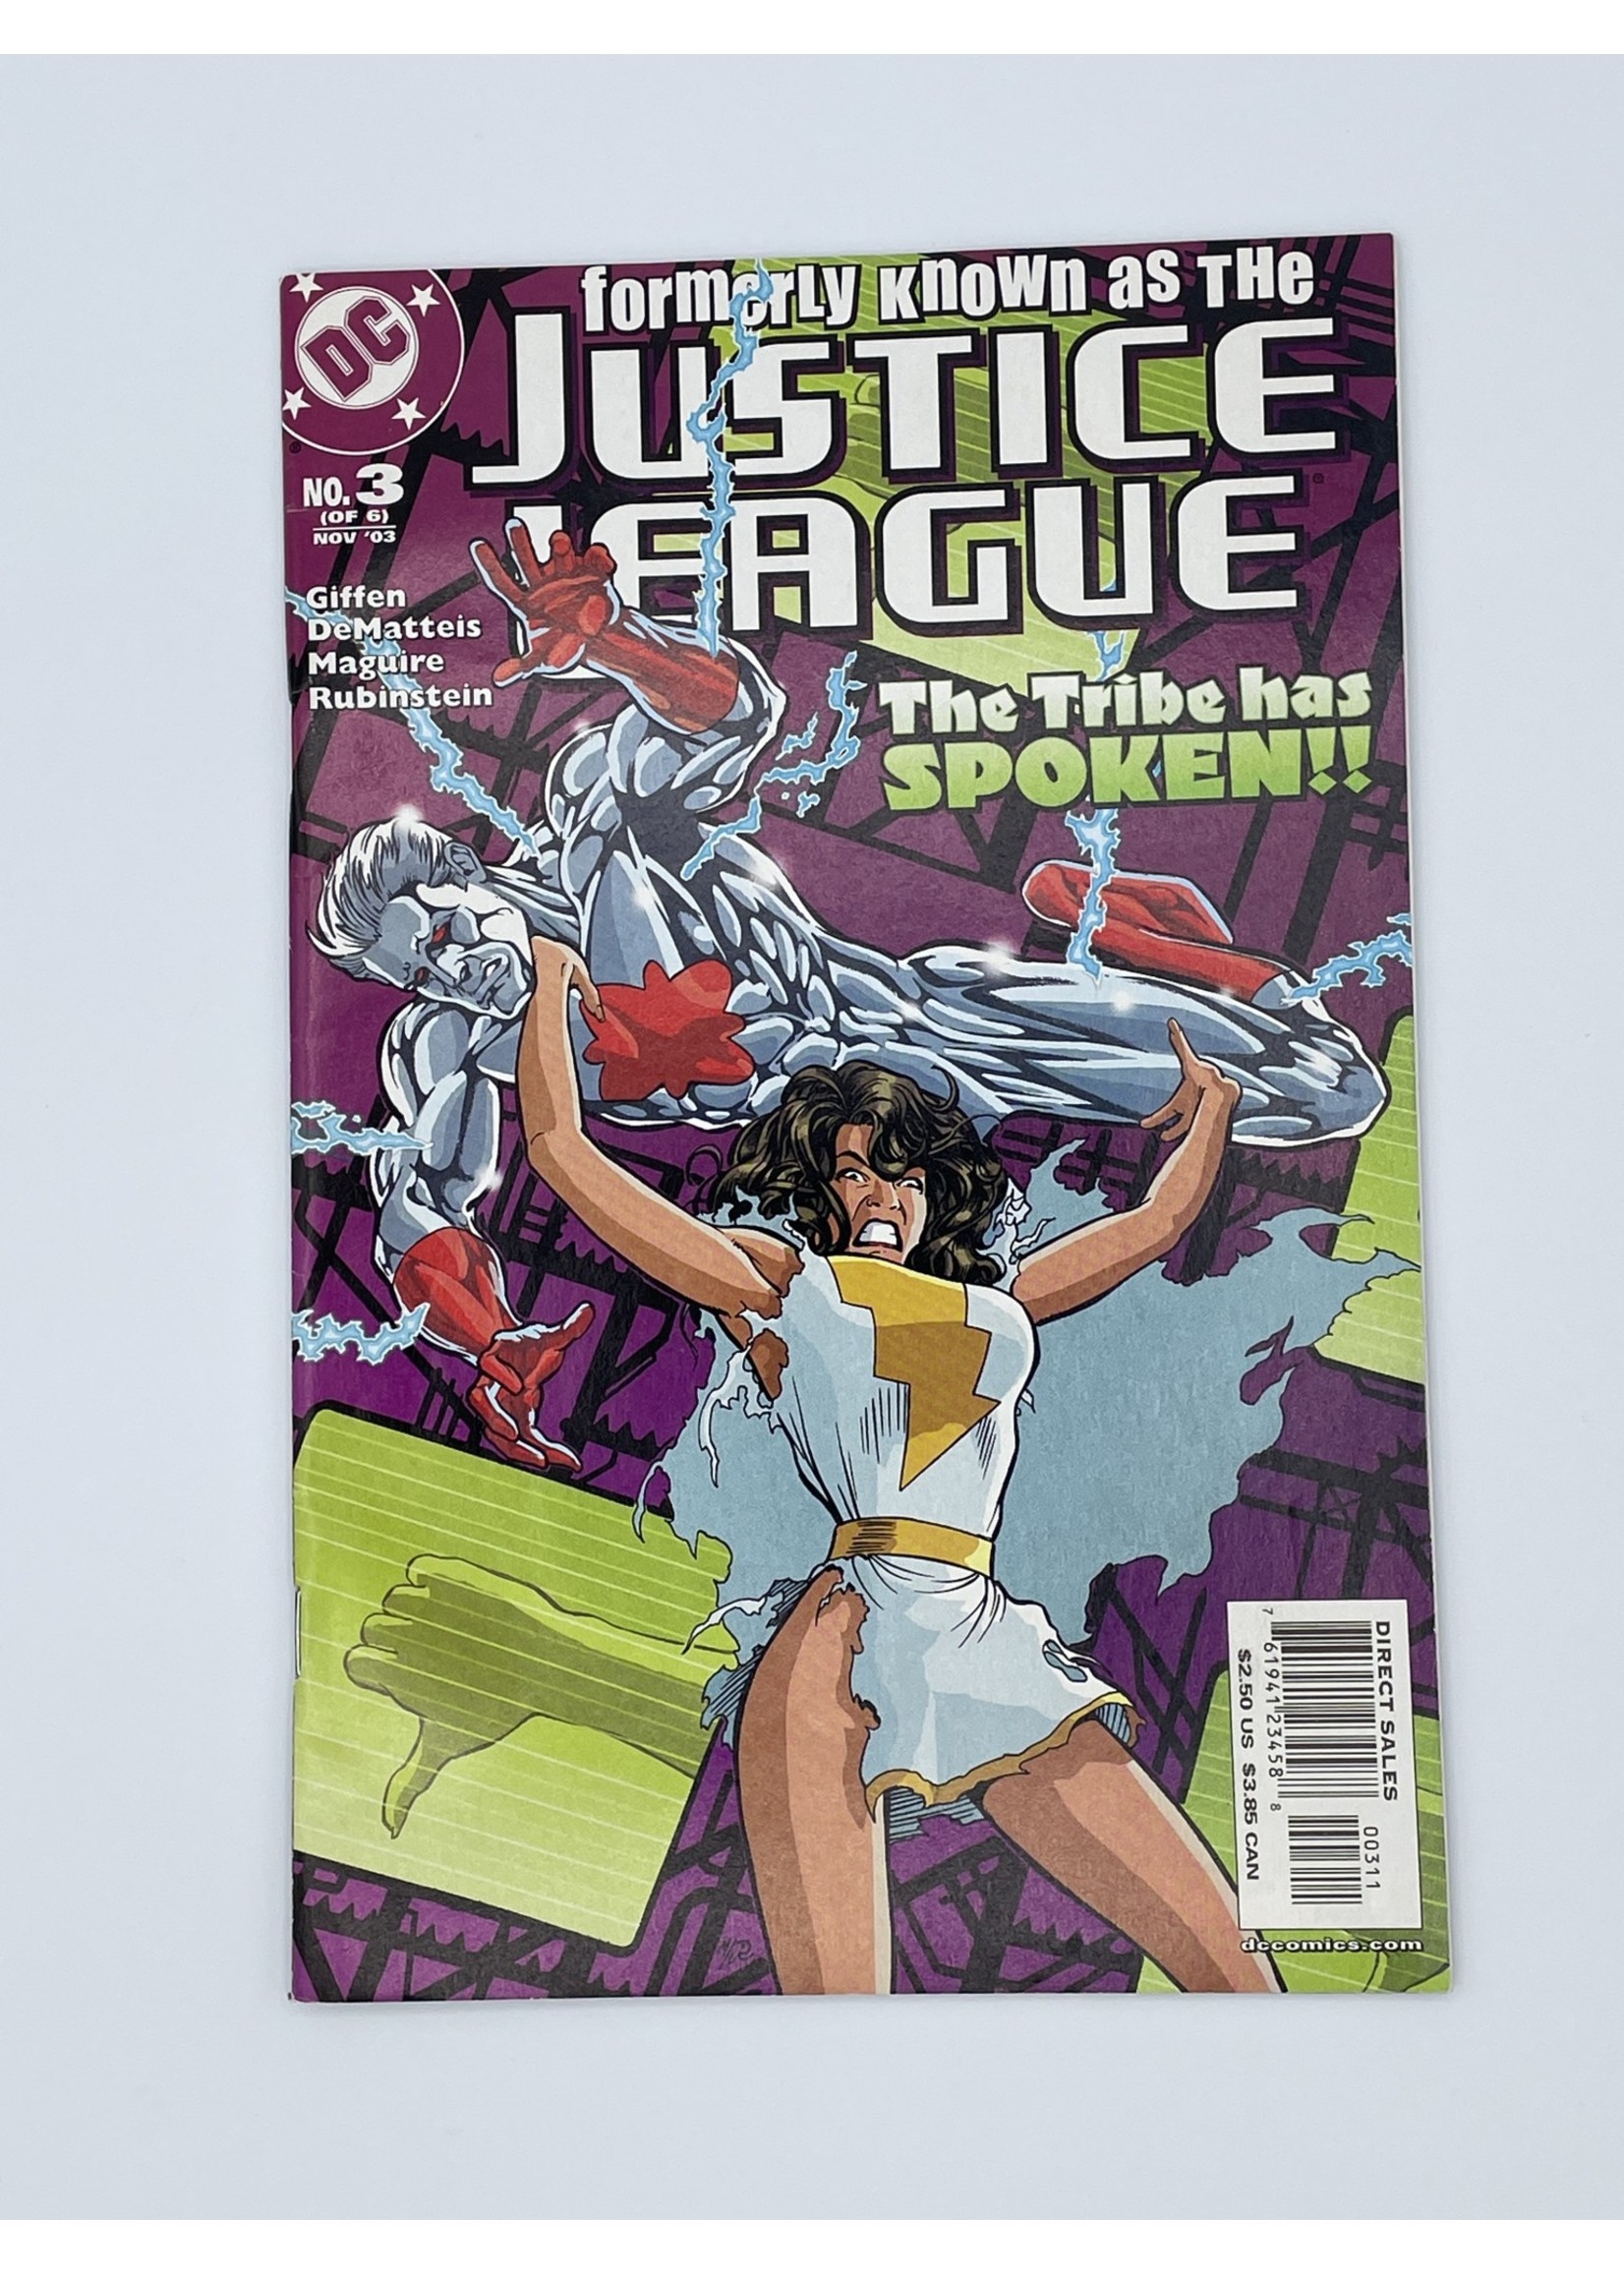 DC Formerly Known As The Justice League #3 Dc November 2003